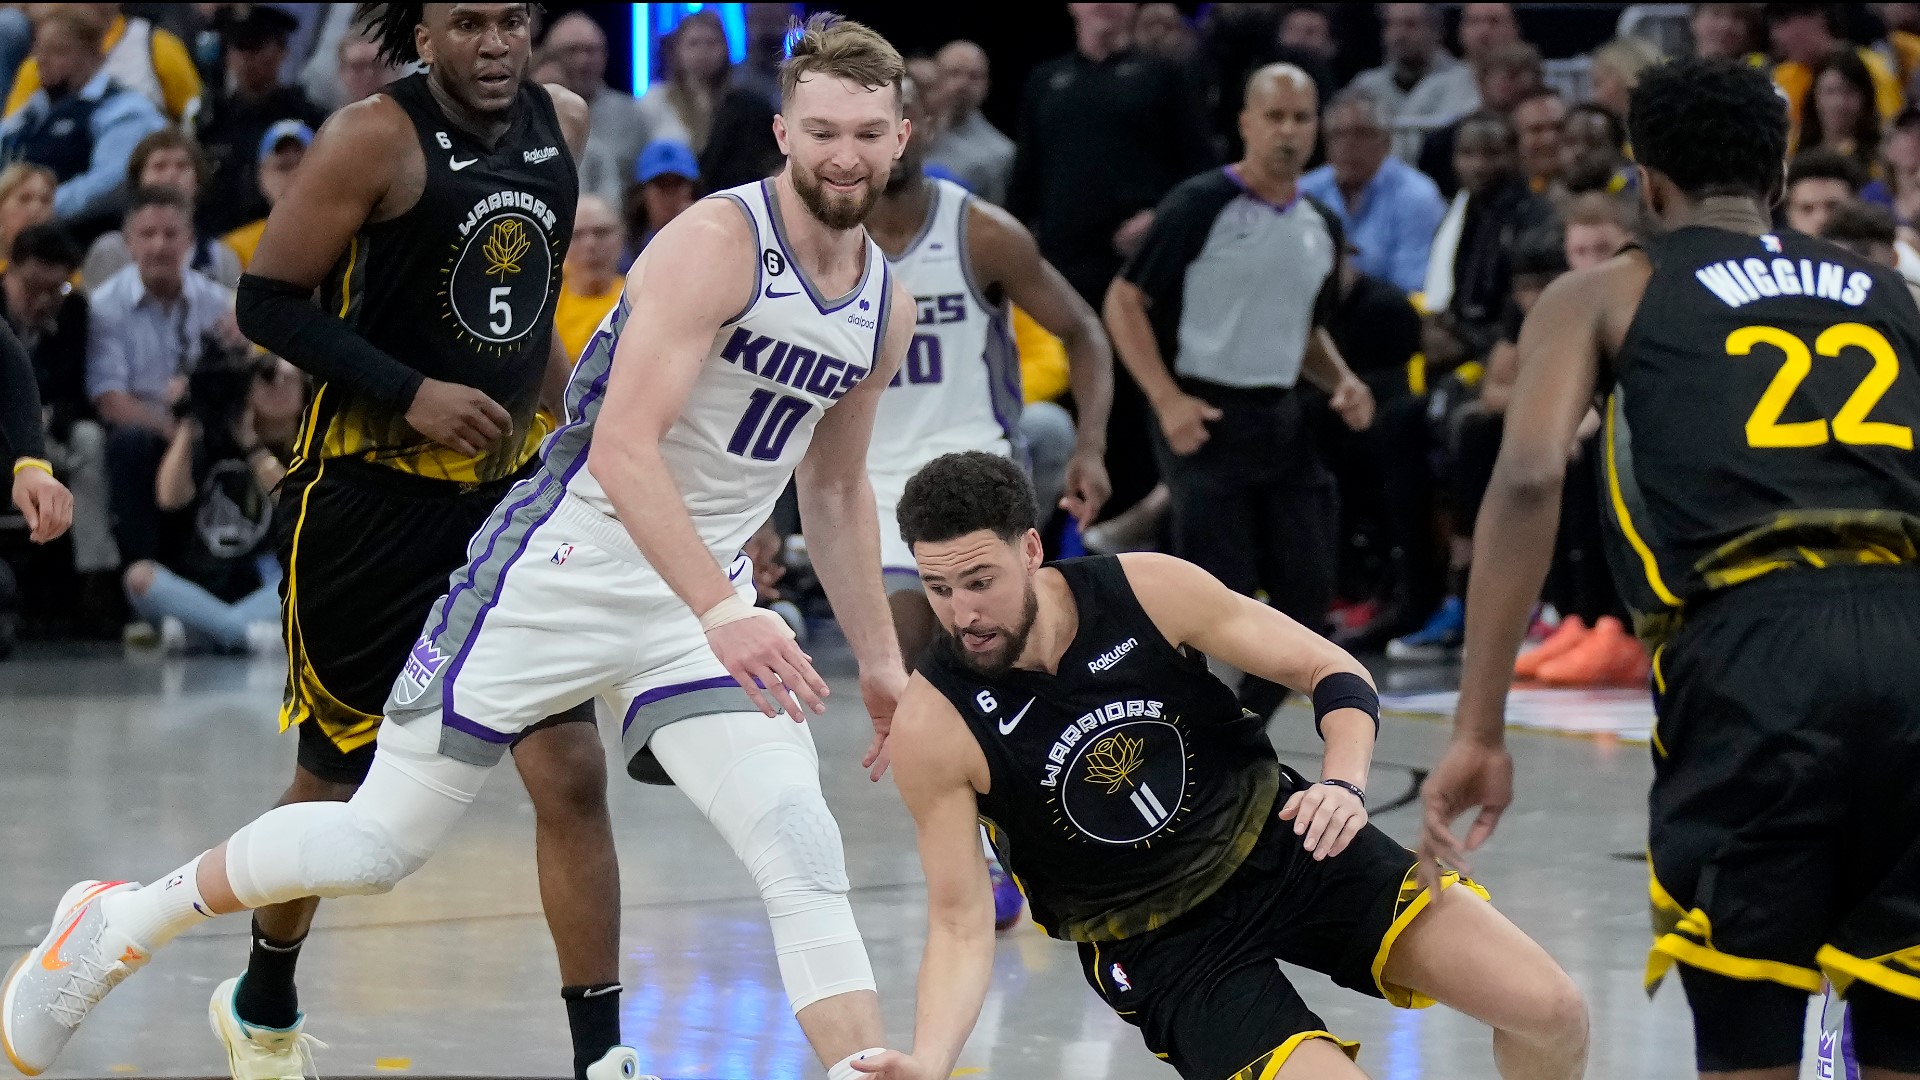 The Sacramento Kings fell to the Golden State Warriors Thursday night, meaning this series will at least go to a Game 5.